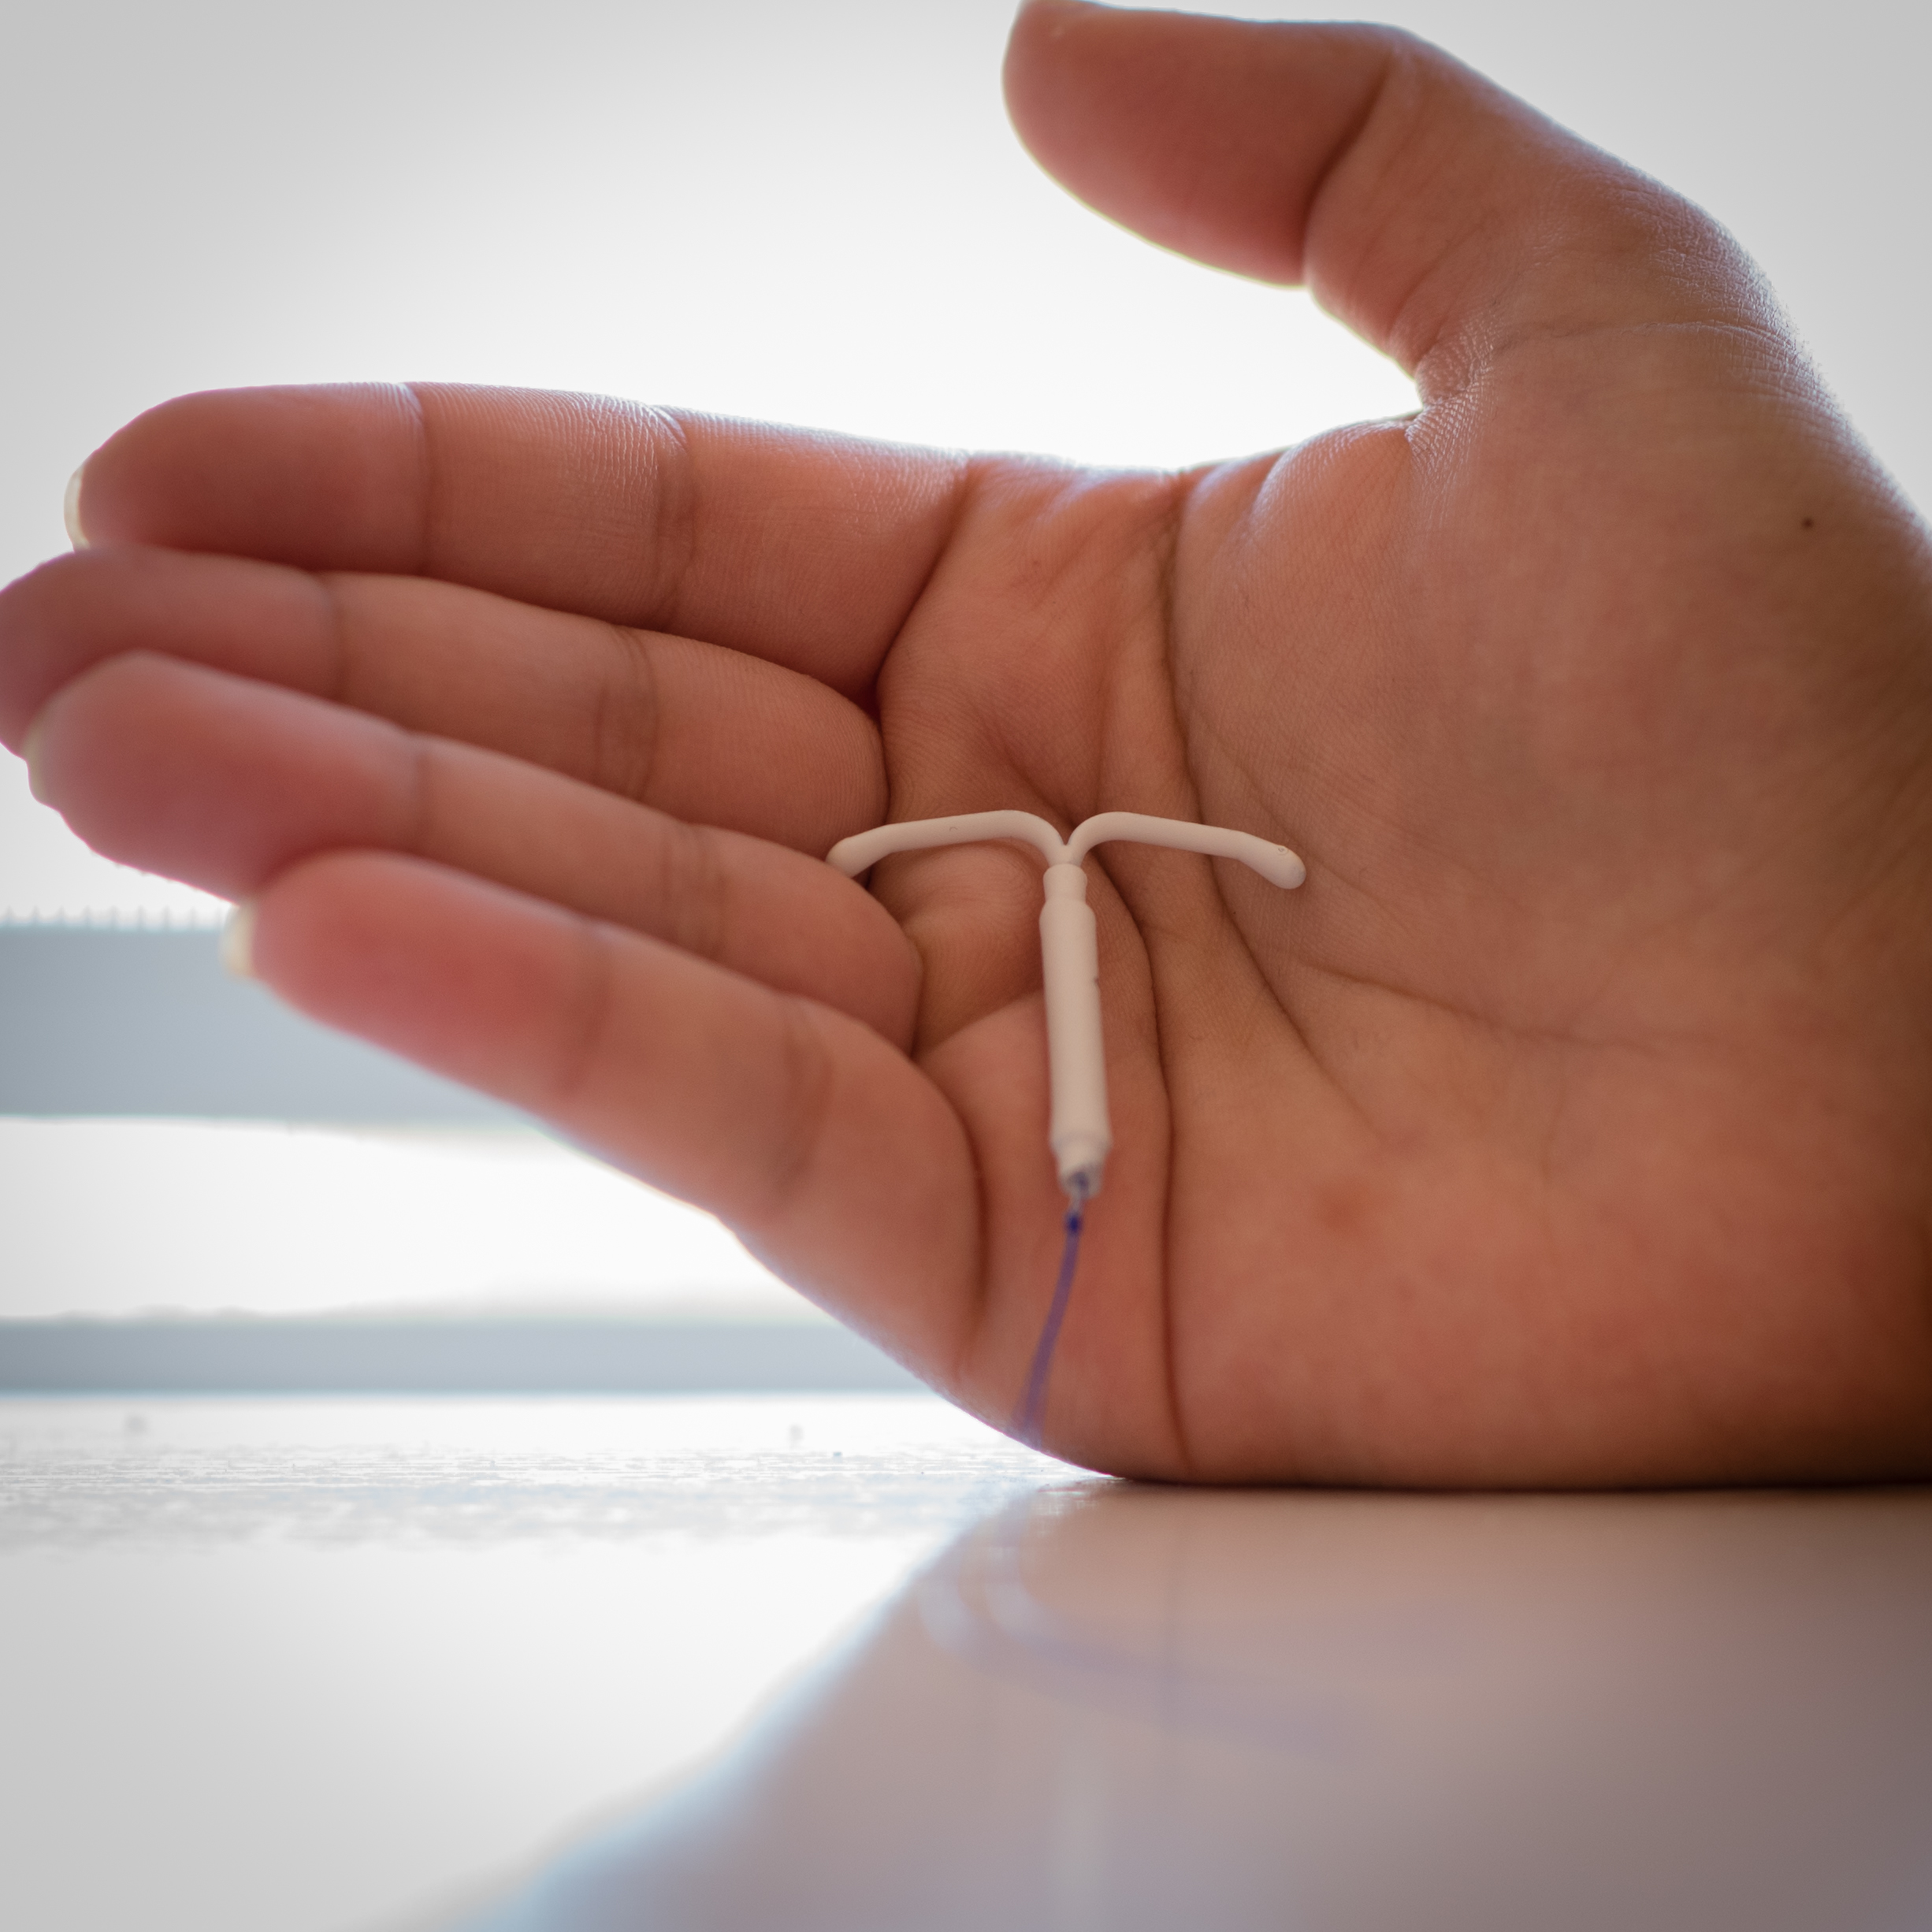 an IUD in the open palm of a person's hand